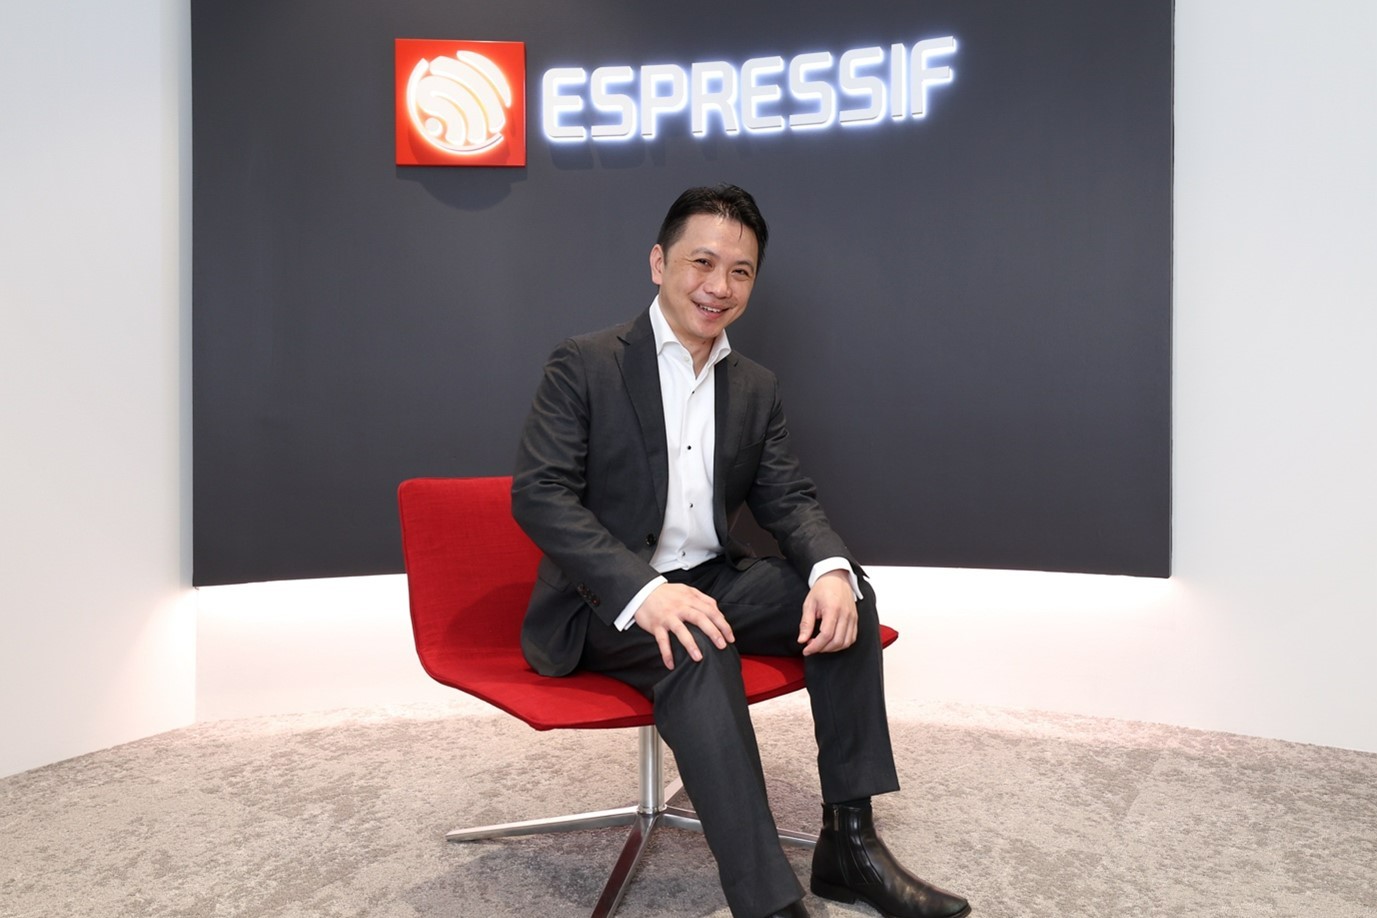 Mr Teo is the founder of Espressif, a fabless semiconductor company manufacturing low-power chipsets, and has spearheaded the development of two flagship Internet of Things (IoT) microchips.